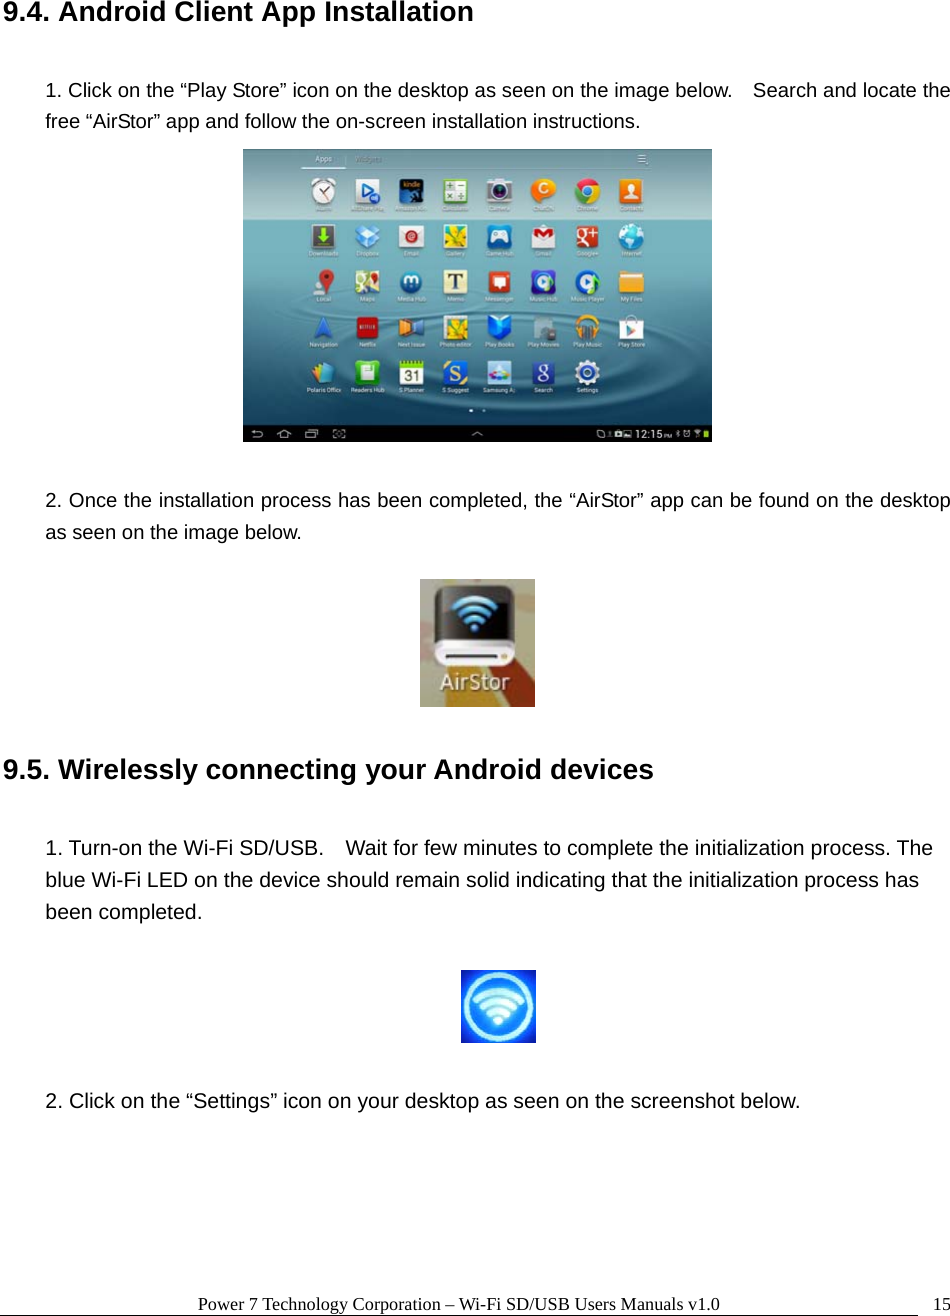 Power 7 Technology Corporation – Wi-Fi SD/USB Users Manuals v1.0  159.4. Android Client App Installation  1. Click on the “Play Store” icon on the desktop as seen on the image below.    Search and locate the free “AirStor” app and follow the on-screen installation instructions.   2. Once the installation process has been completed, the “AirStor” app can be found on the desktop as seen on the image below.    9.5. Wirelessly connecting your Android devices  1. Turn-on the Wi-Fi SD/USB.    Wait for few minutes to complete the initialization process. The blue Wi-Fi LED on the device should remain solid indicating that the initialization process has been completed.    2. Click on the “Settings” icon on your desktop as seen on the screenshot below.  